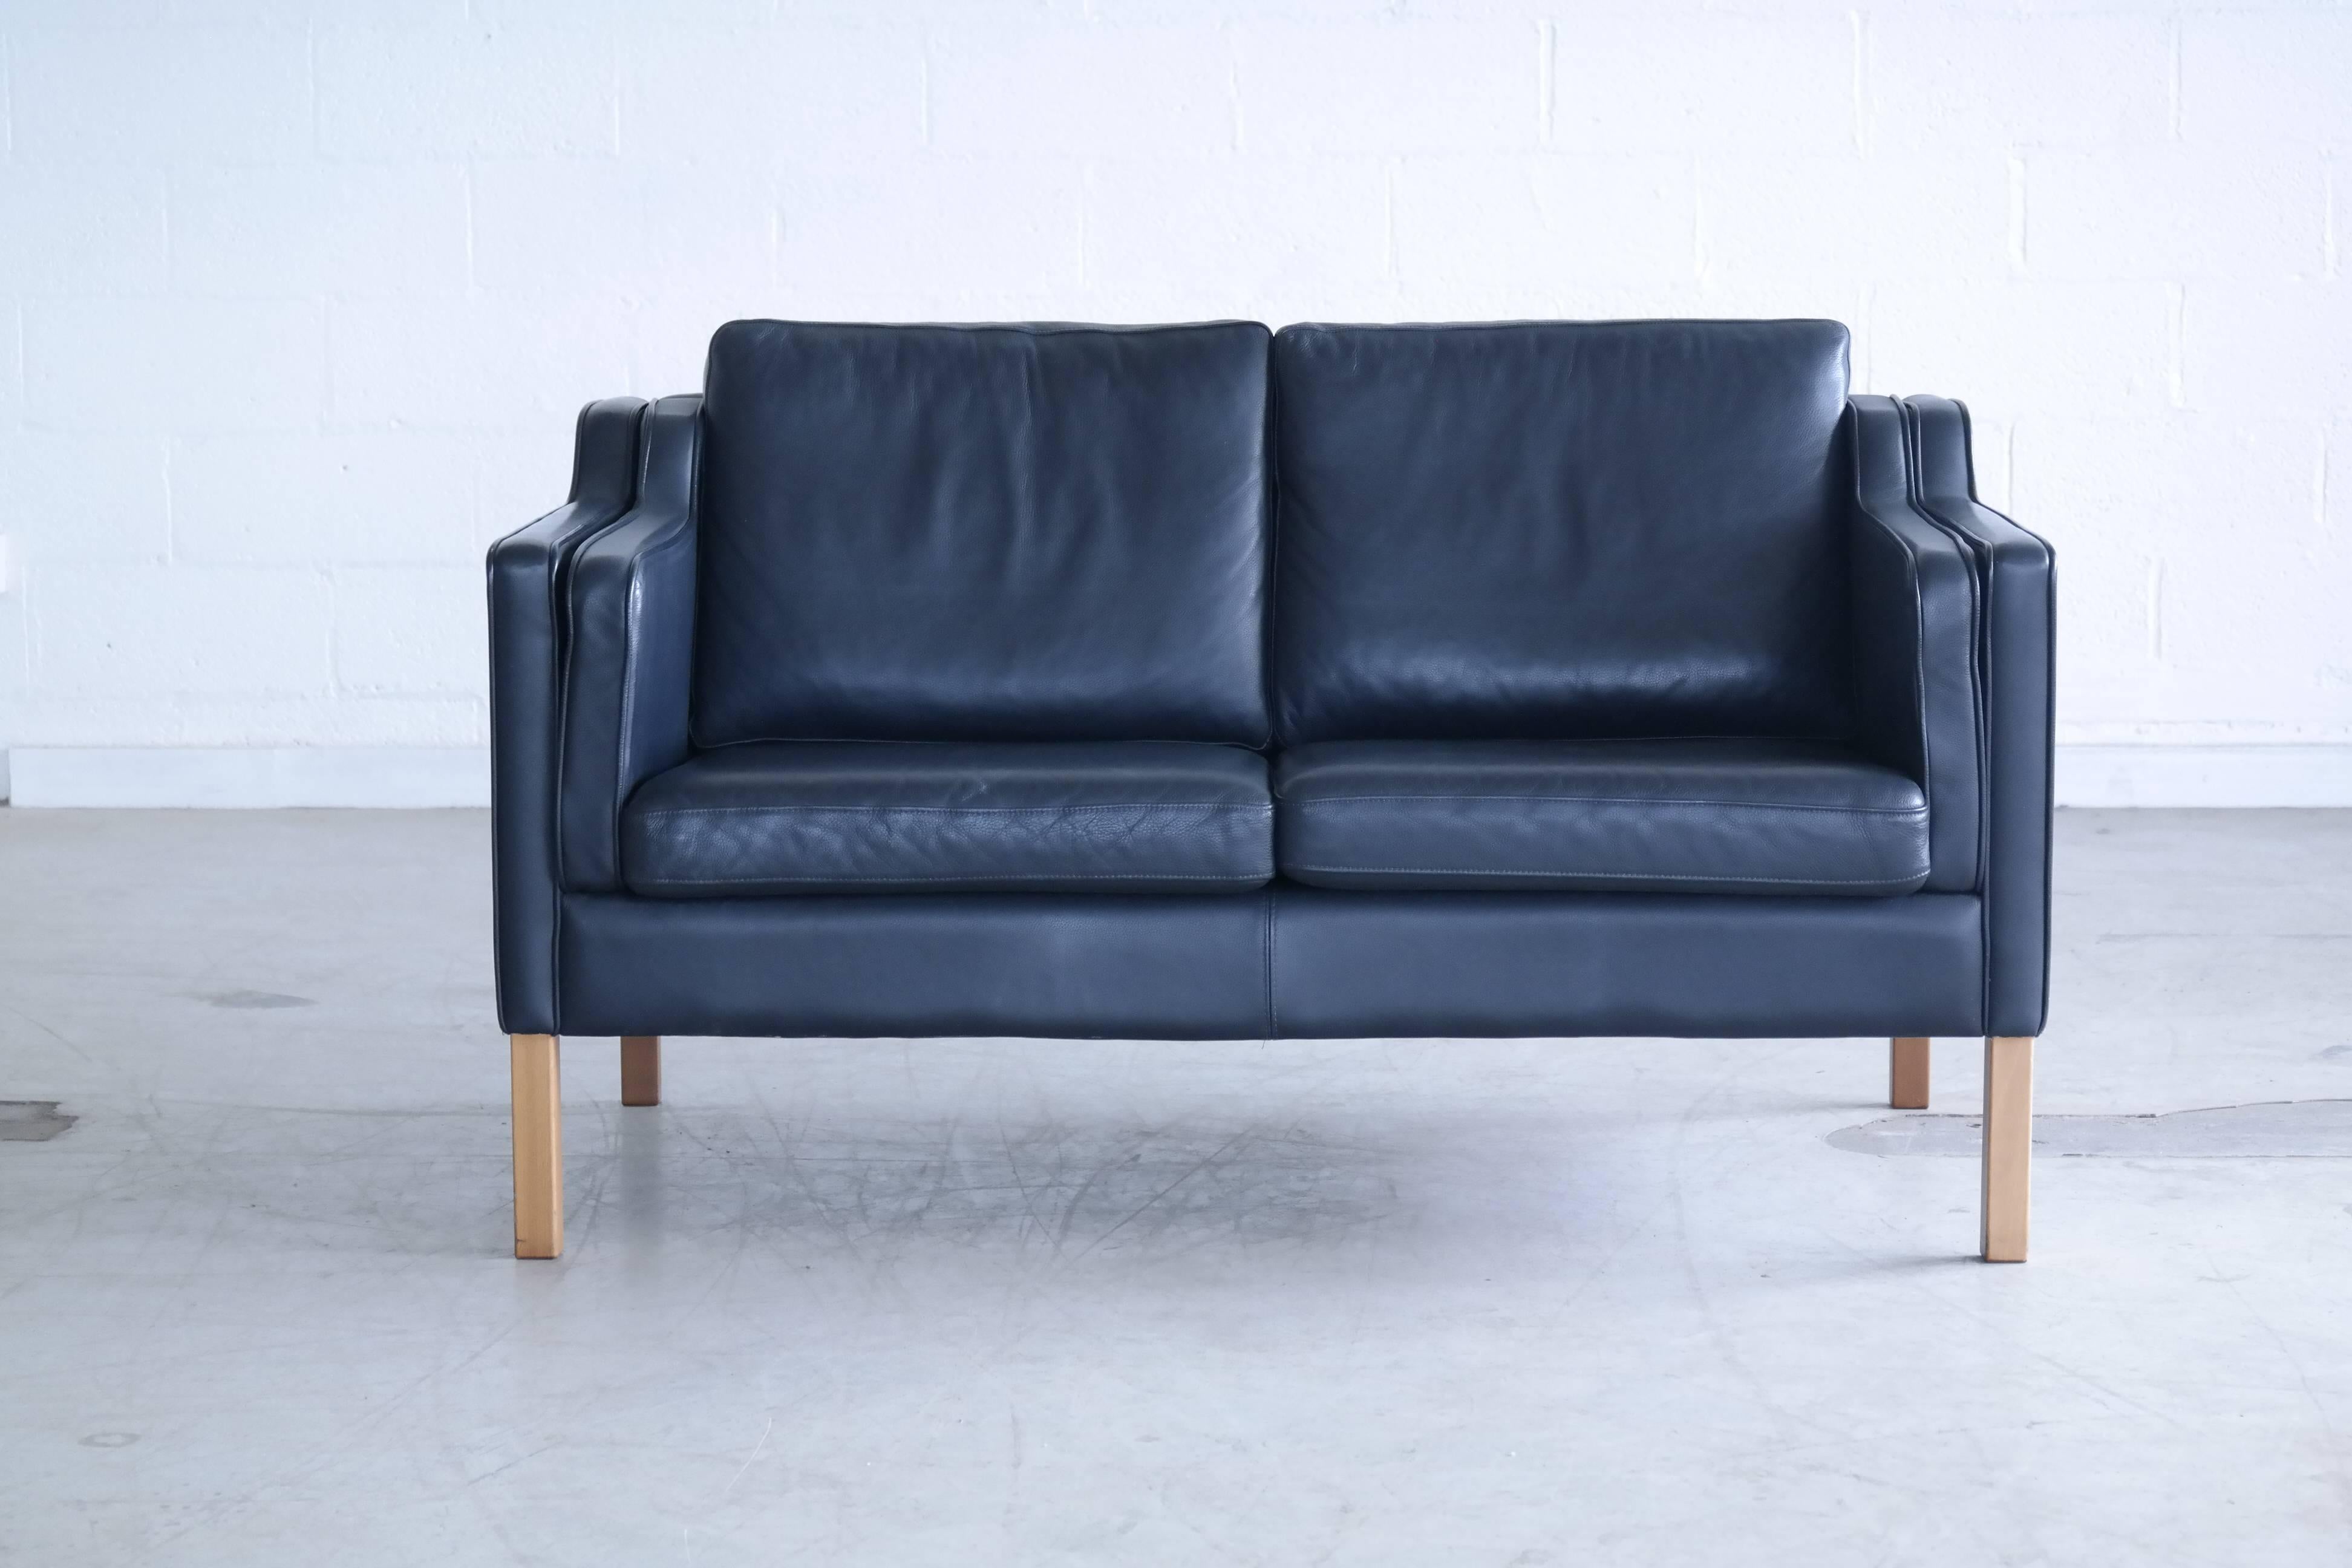 Very elegant and comfortable Classic Børge Mogensen style sofa model 2212 in Dark Sapphire navy blue leather by Stouby Polsterfabrik of Denmark. High quality leather over a beech wood frame and legs. Cushions are top filled with down. Nice worn in